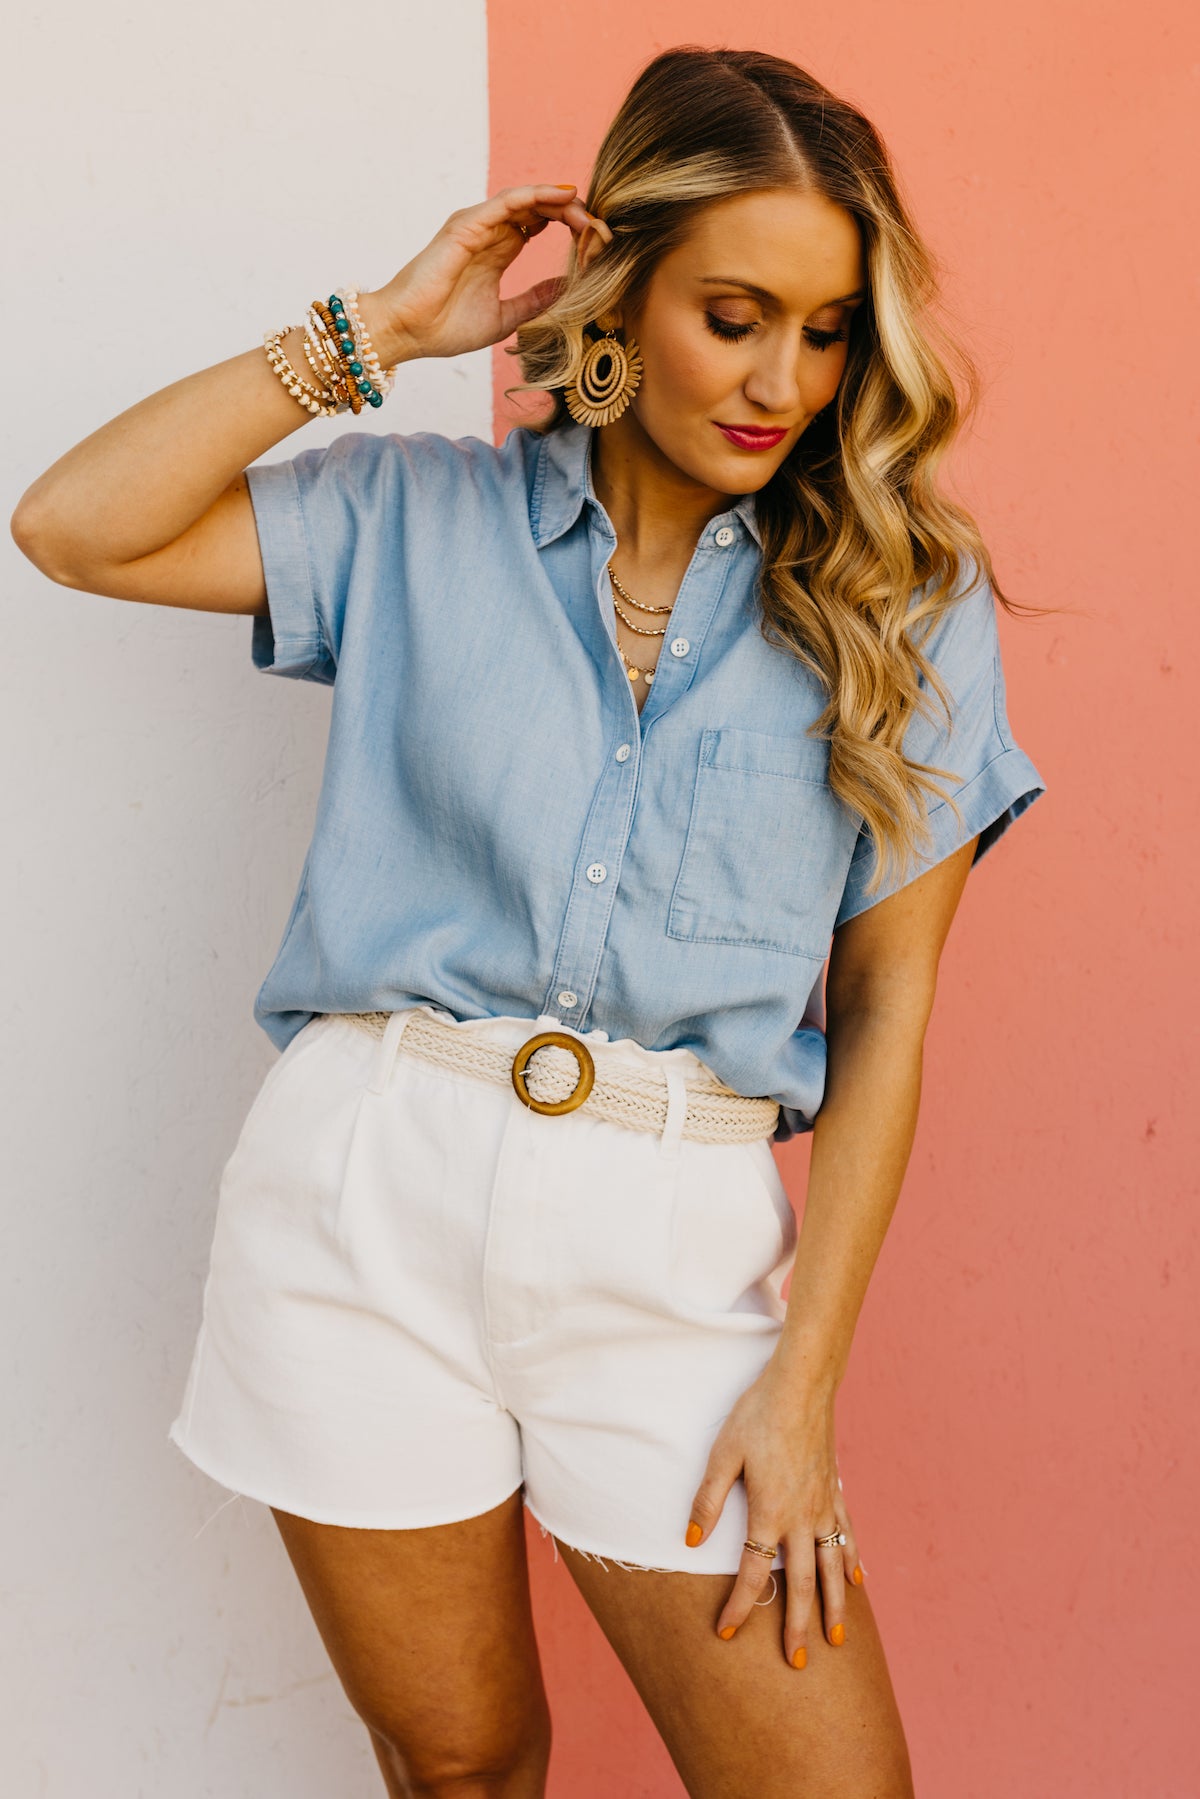 The Haley Cuffed Sleeve Chambray Top